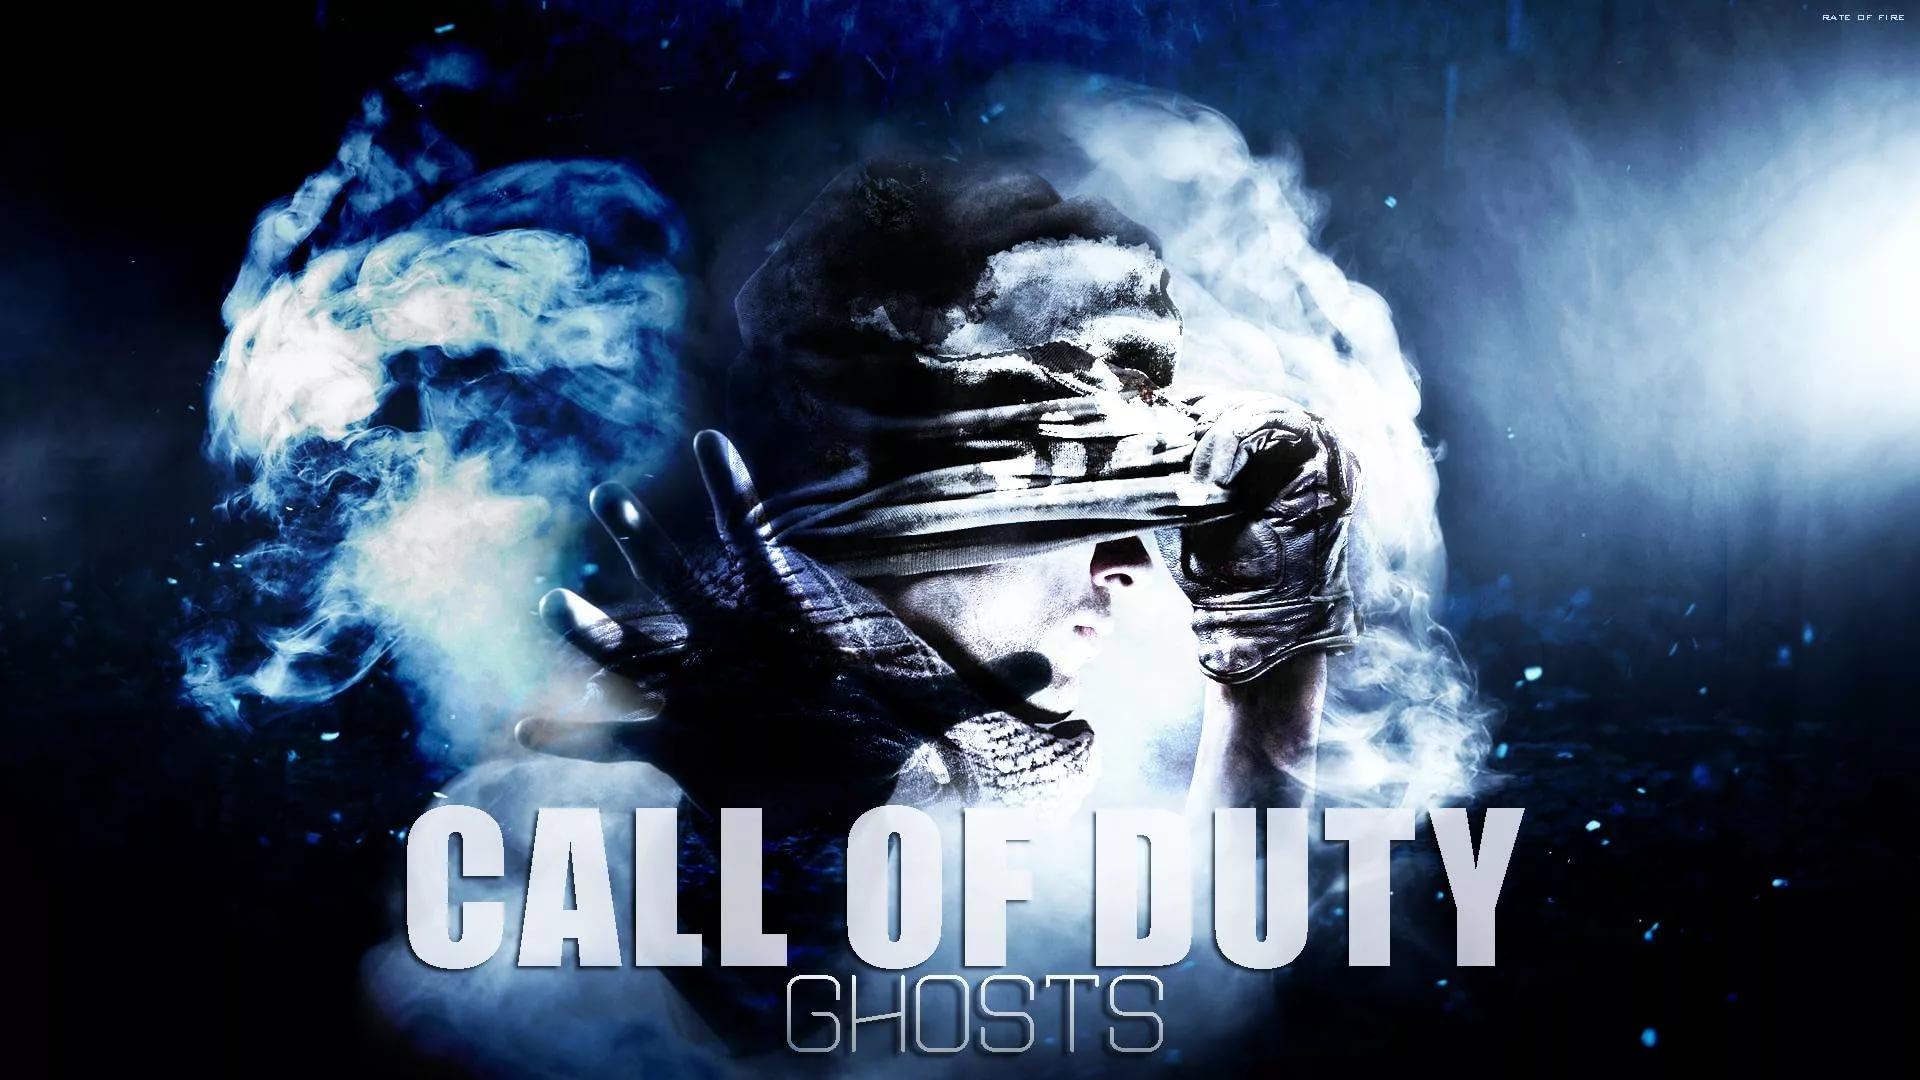 Call Of Duty Ghosts HD Wallpaper free